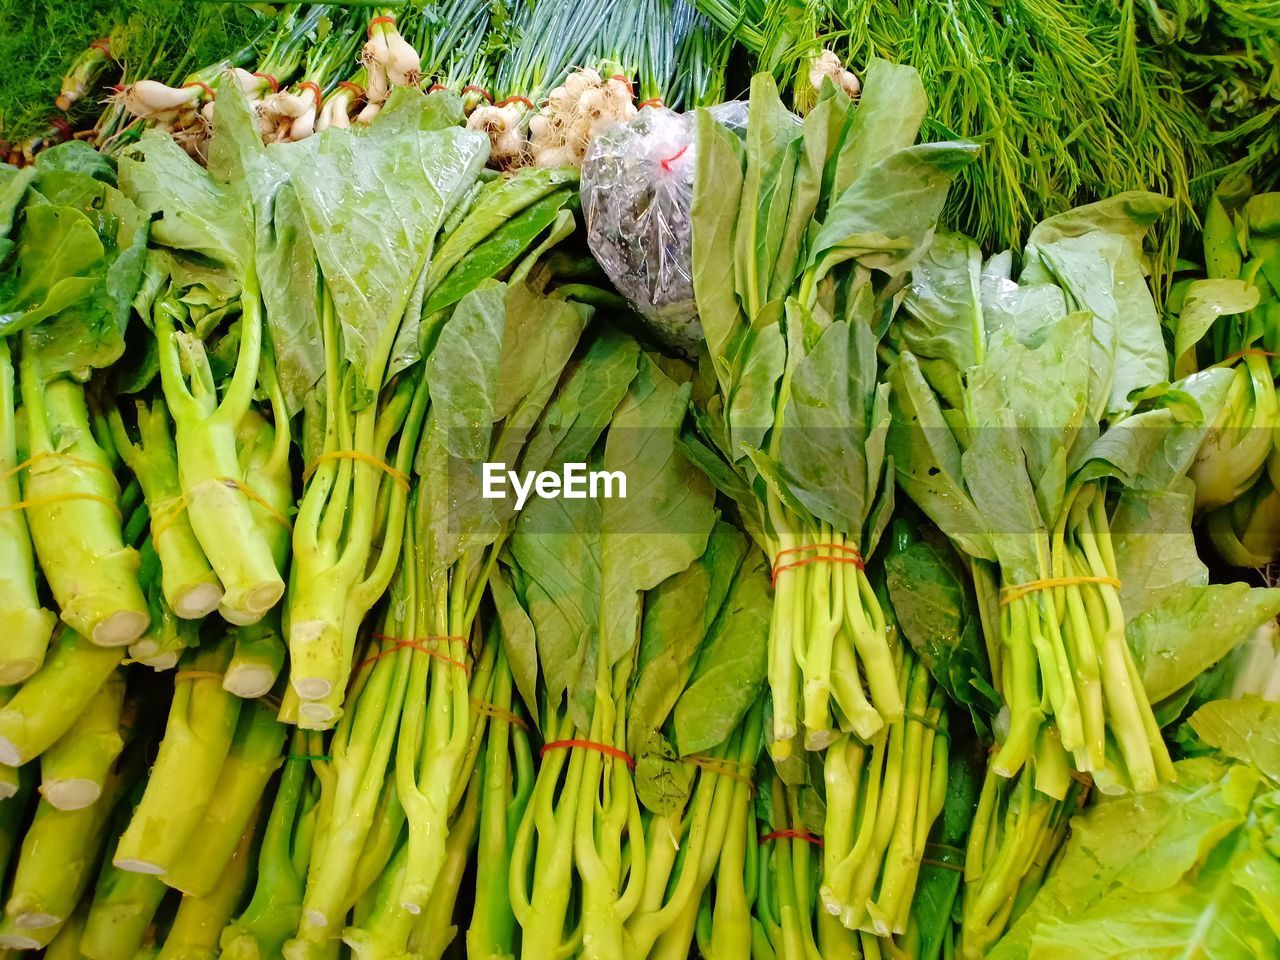 HIGH ANGLE VIEW OF VEGETABLES IN MARKET